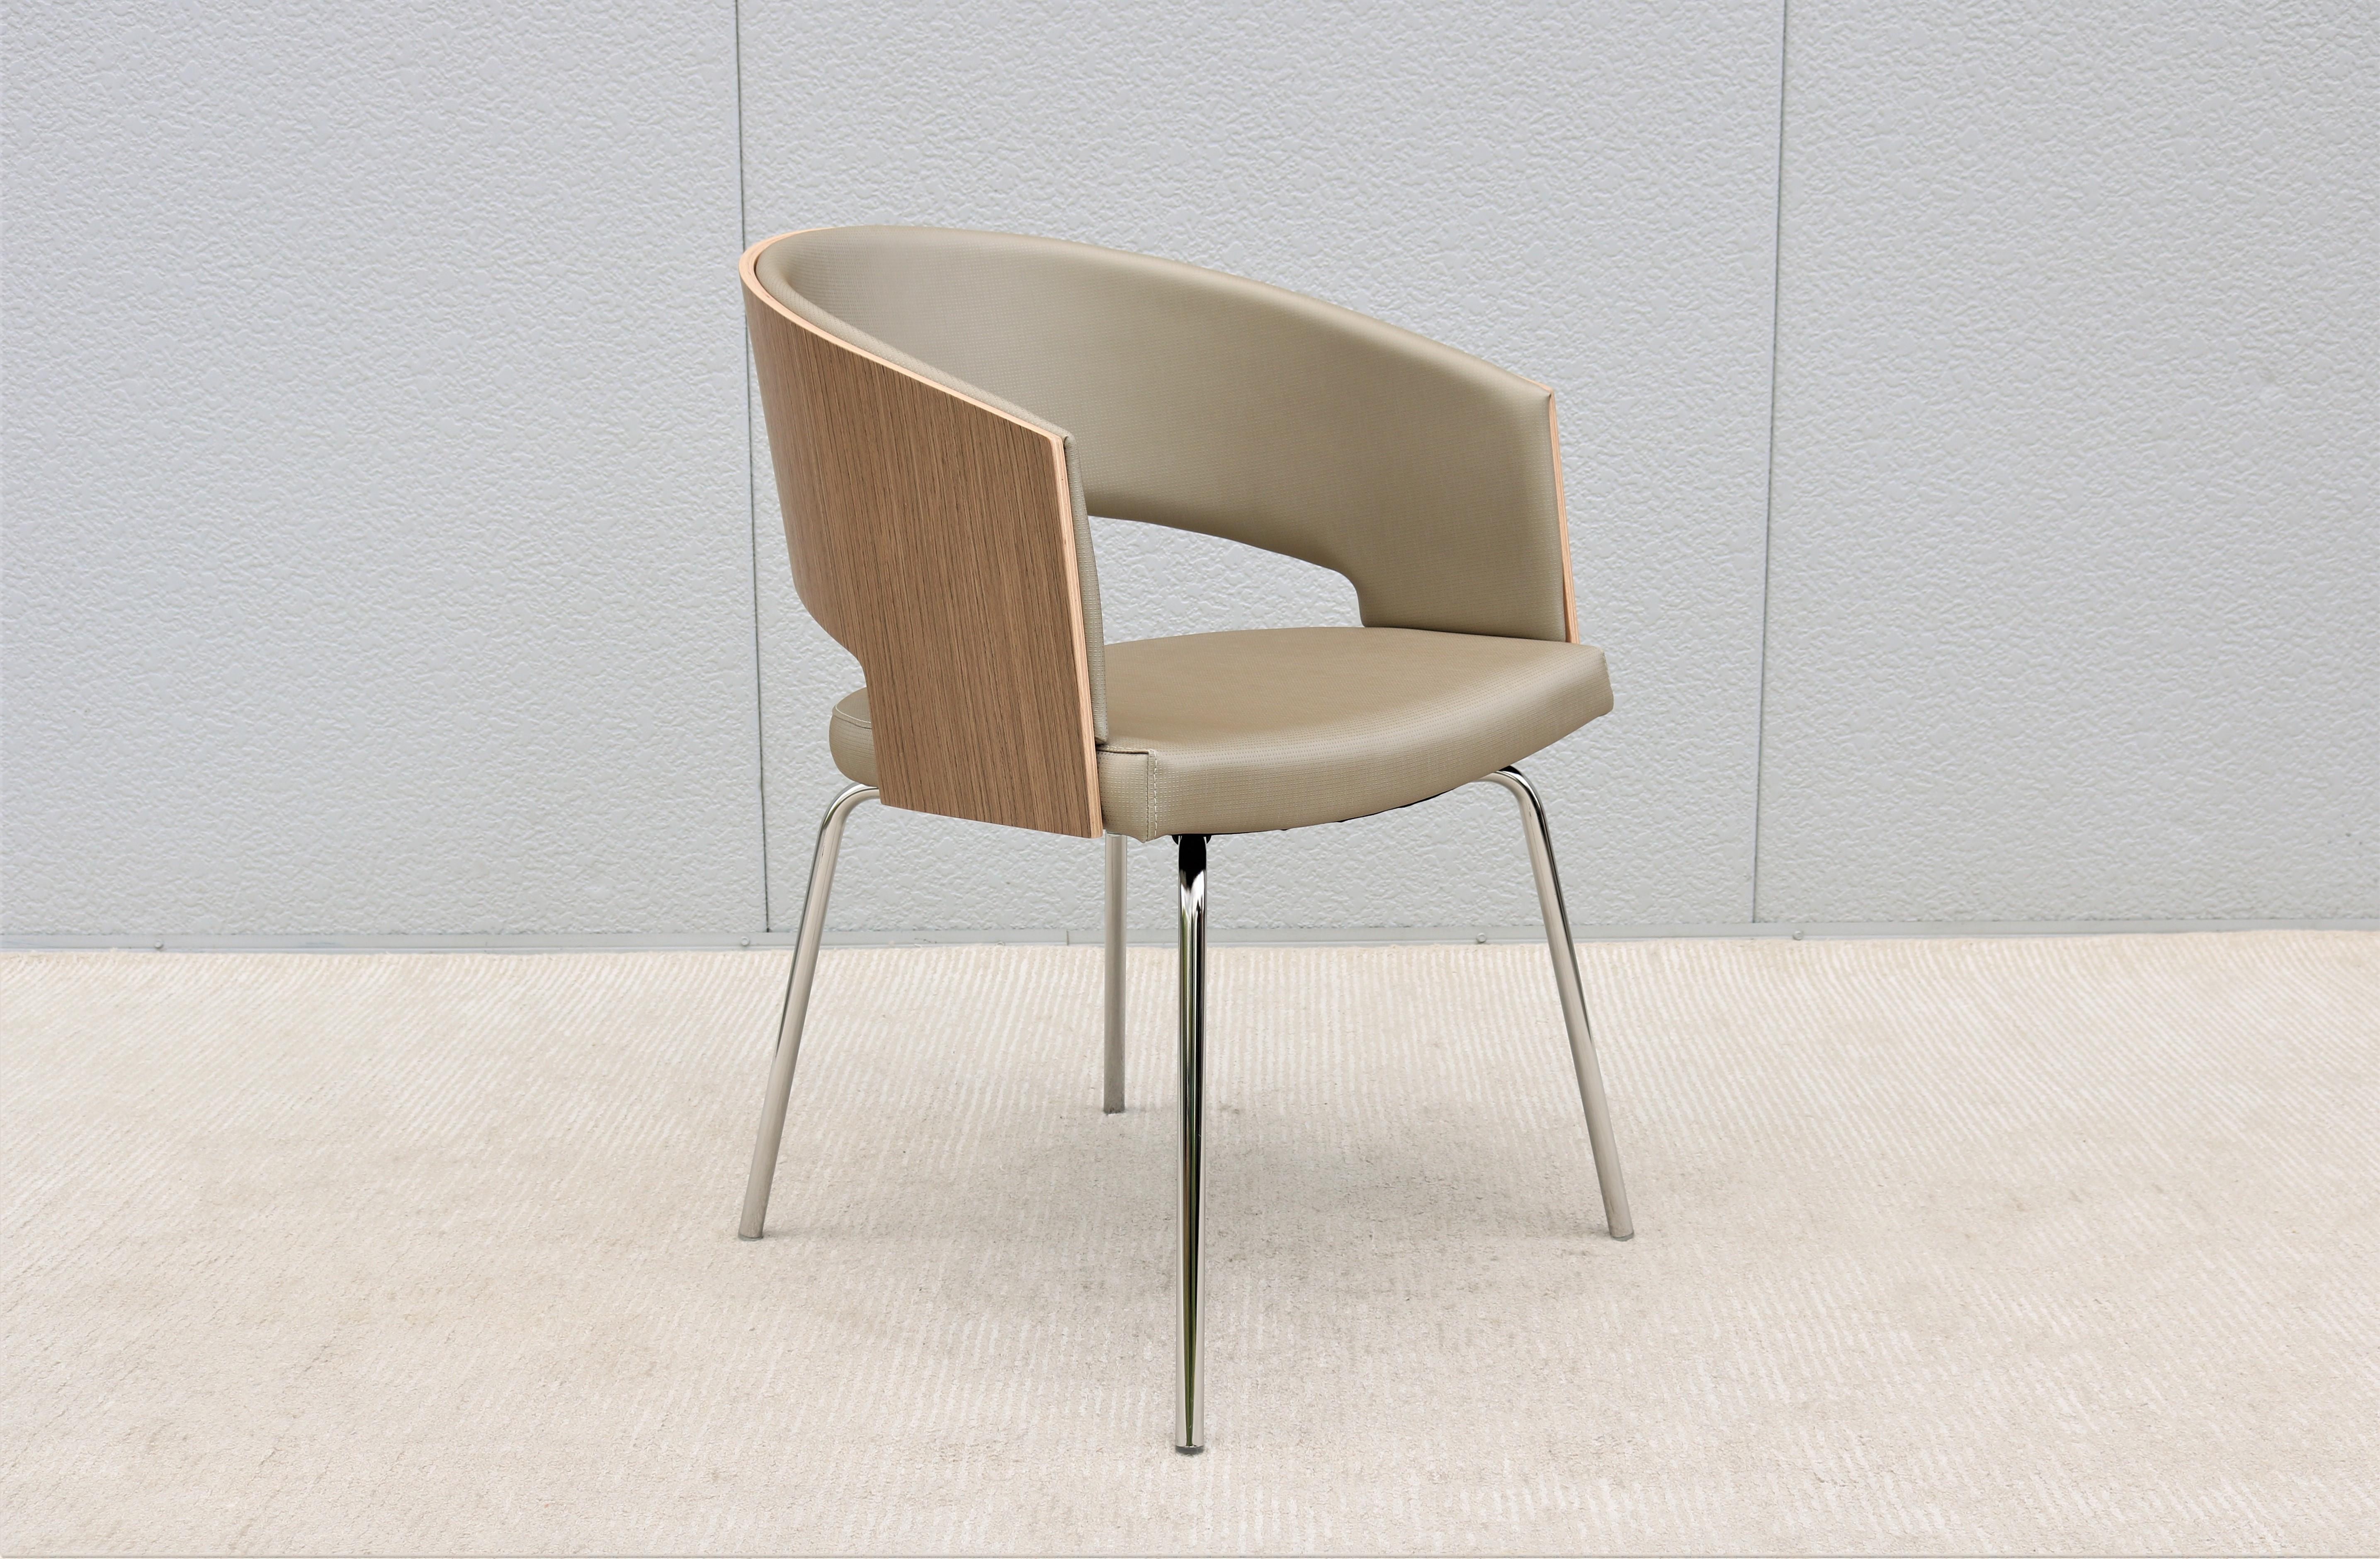 The Source Botte is a versatile and elegant chair which delivers relaxed comfort and exceptional support.
The eye-catching design feature a beautifully shaped rounded back in premium veneer walnut.
A sleek and elegant design will complement any